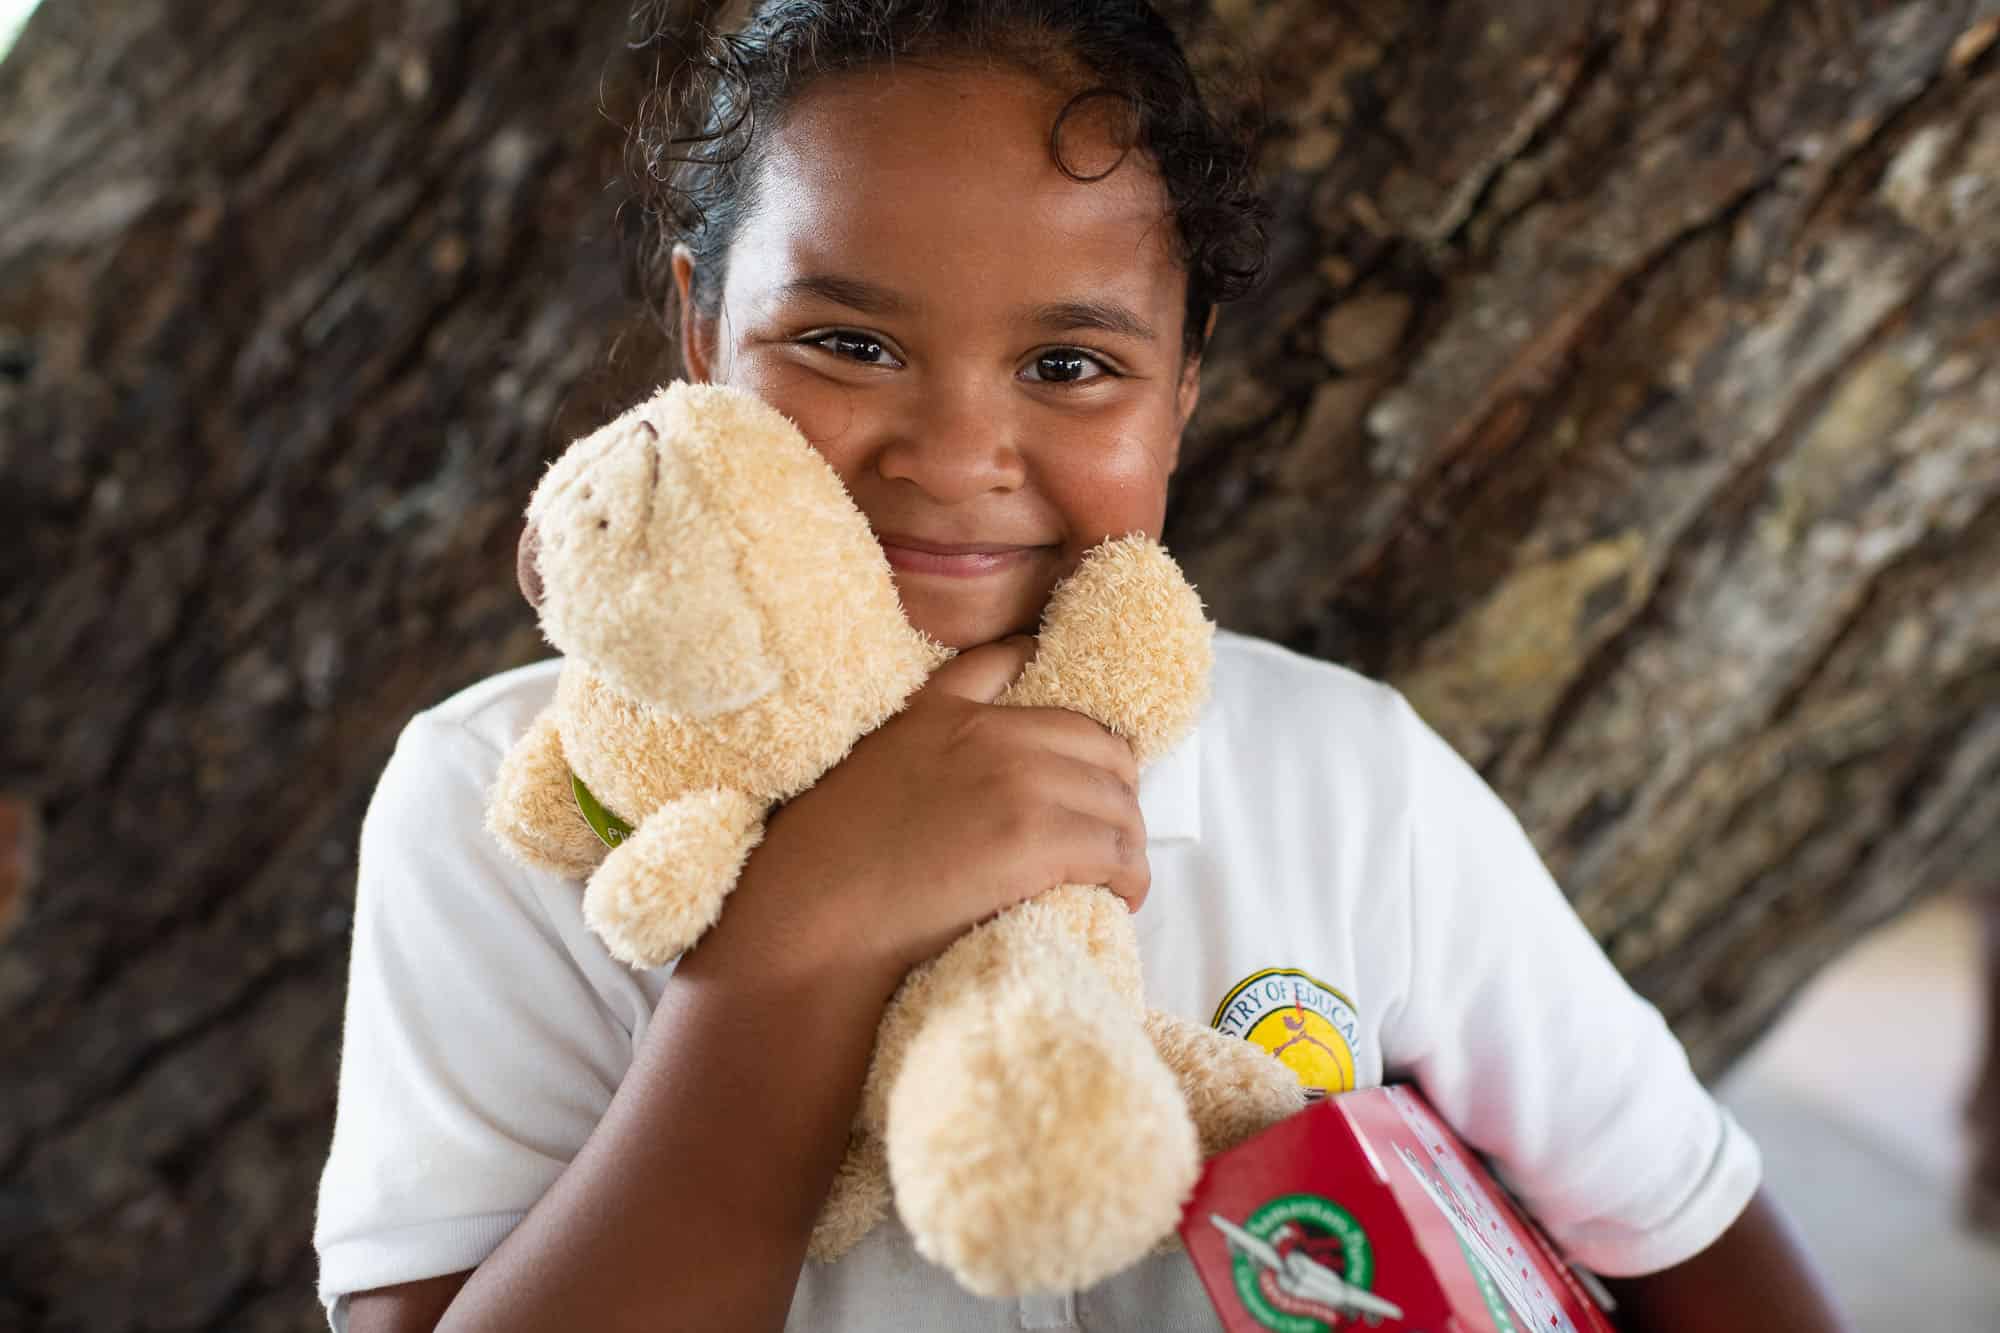 A girl on Ngiwal treasures the stuffed animal she found in her shoebox gift.